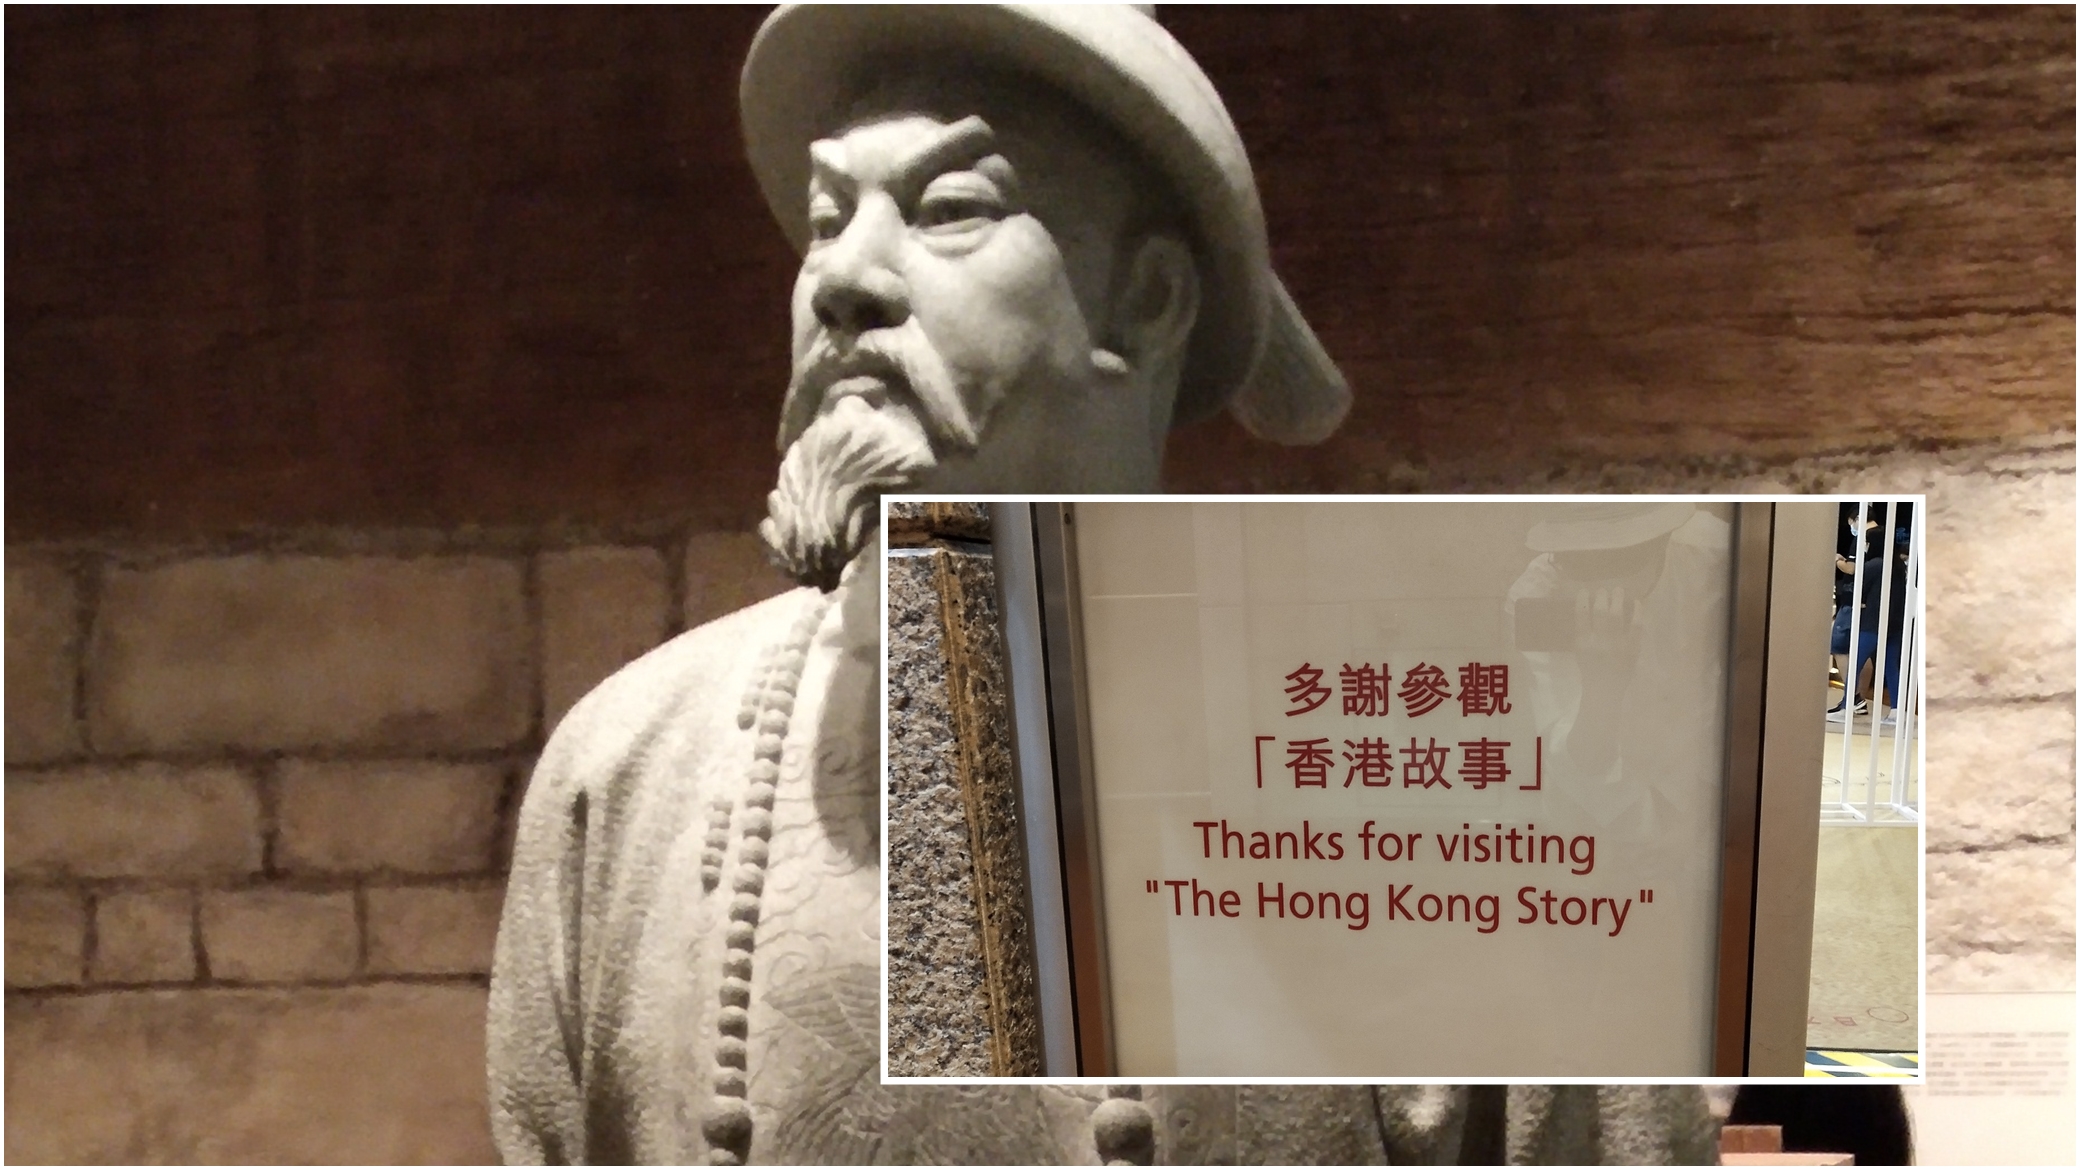 Hong Kong Story permanent exhibition will undergo a two-year renovation